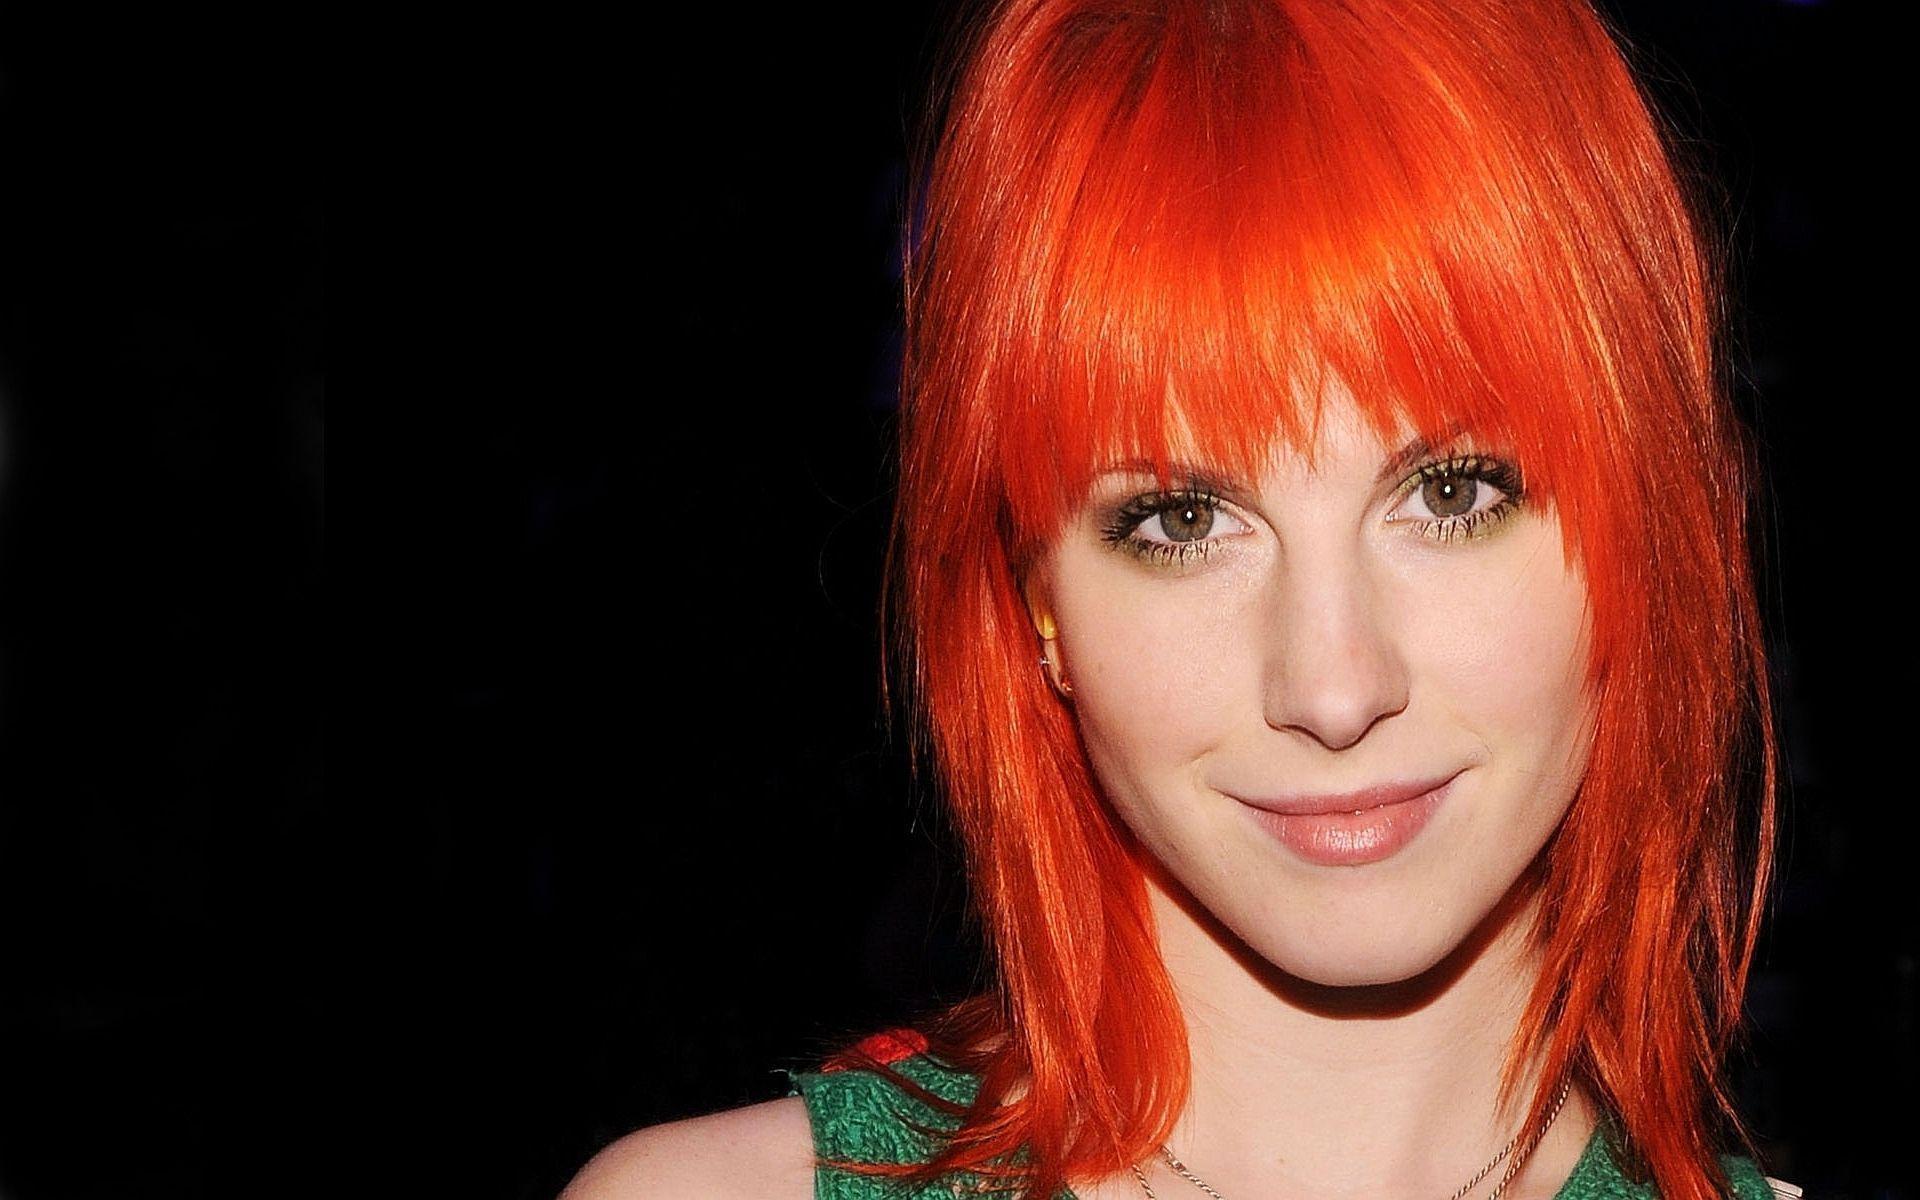 Hayley Williams Hd Wallpapers 14770 Wallpapers HD.